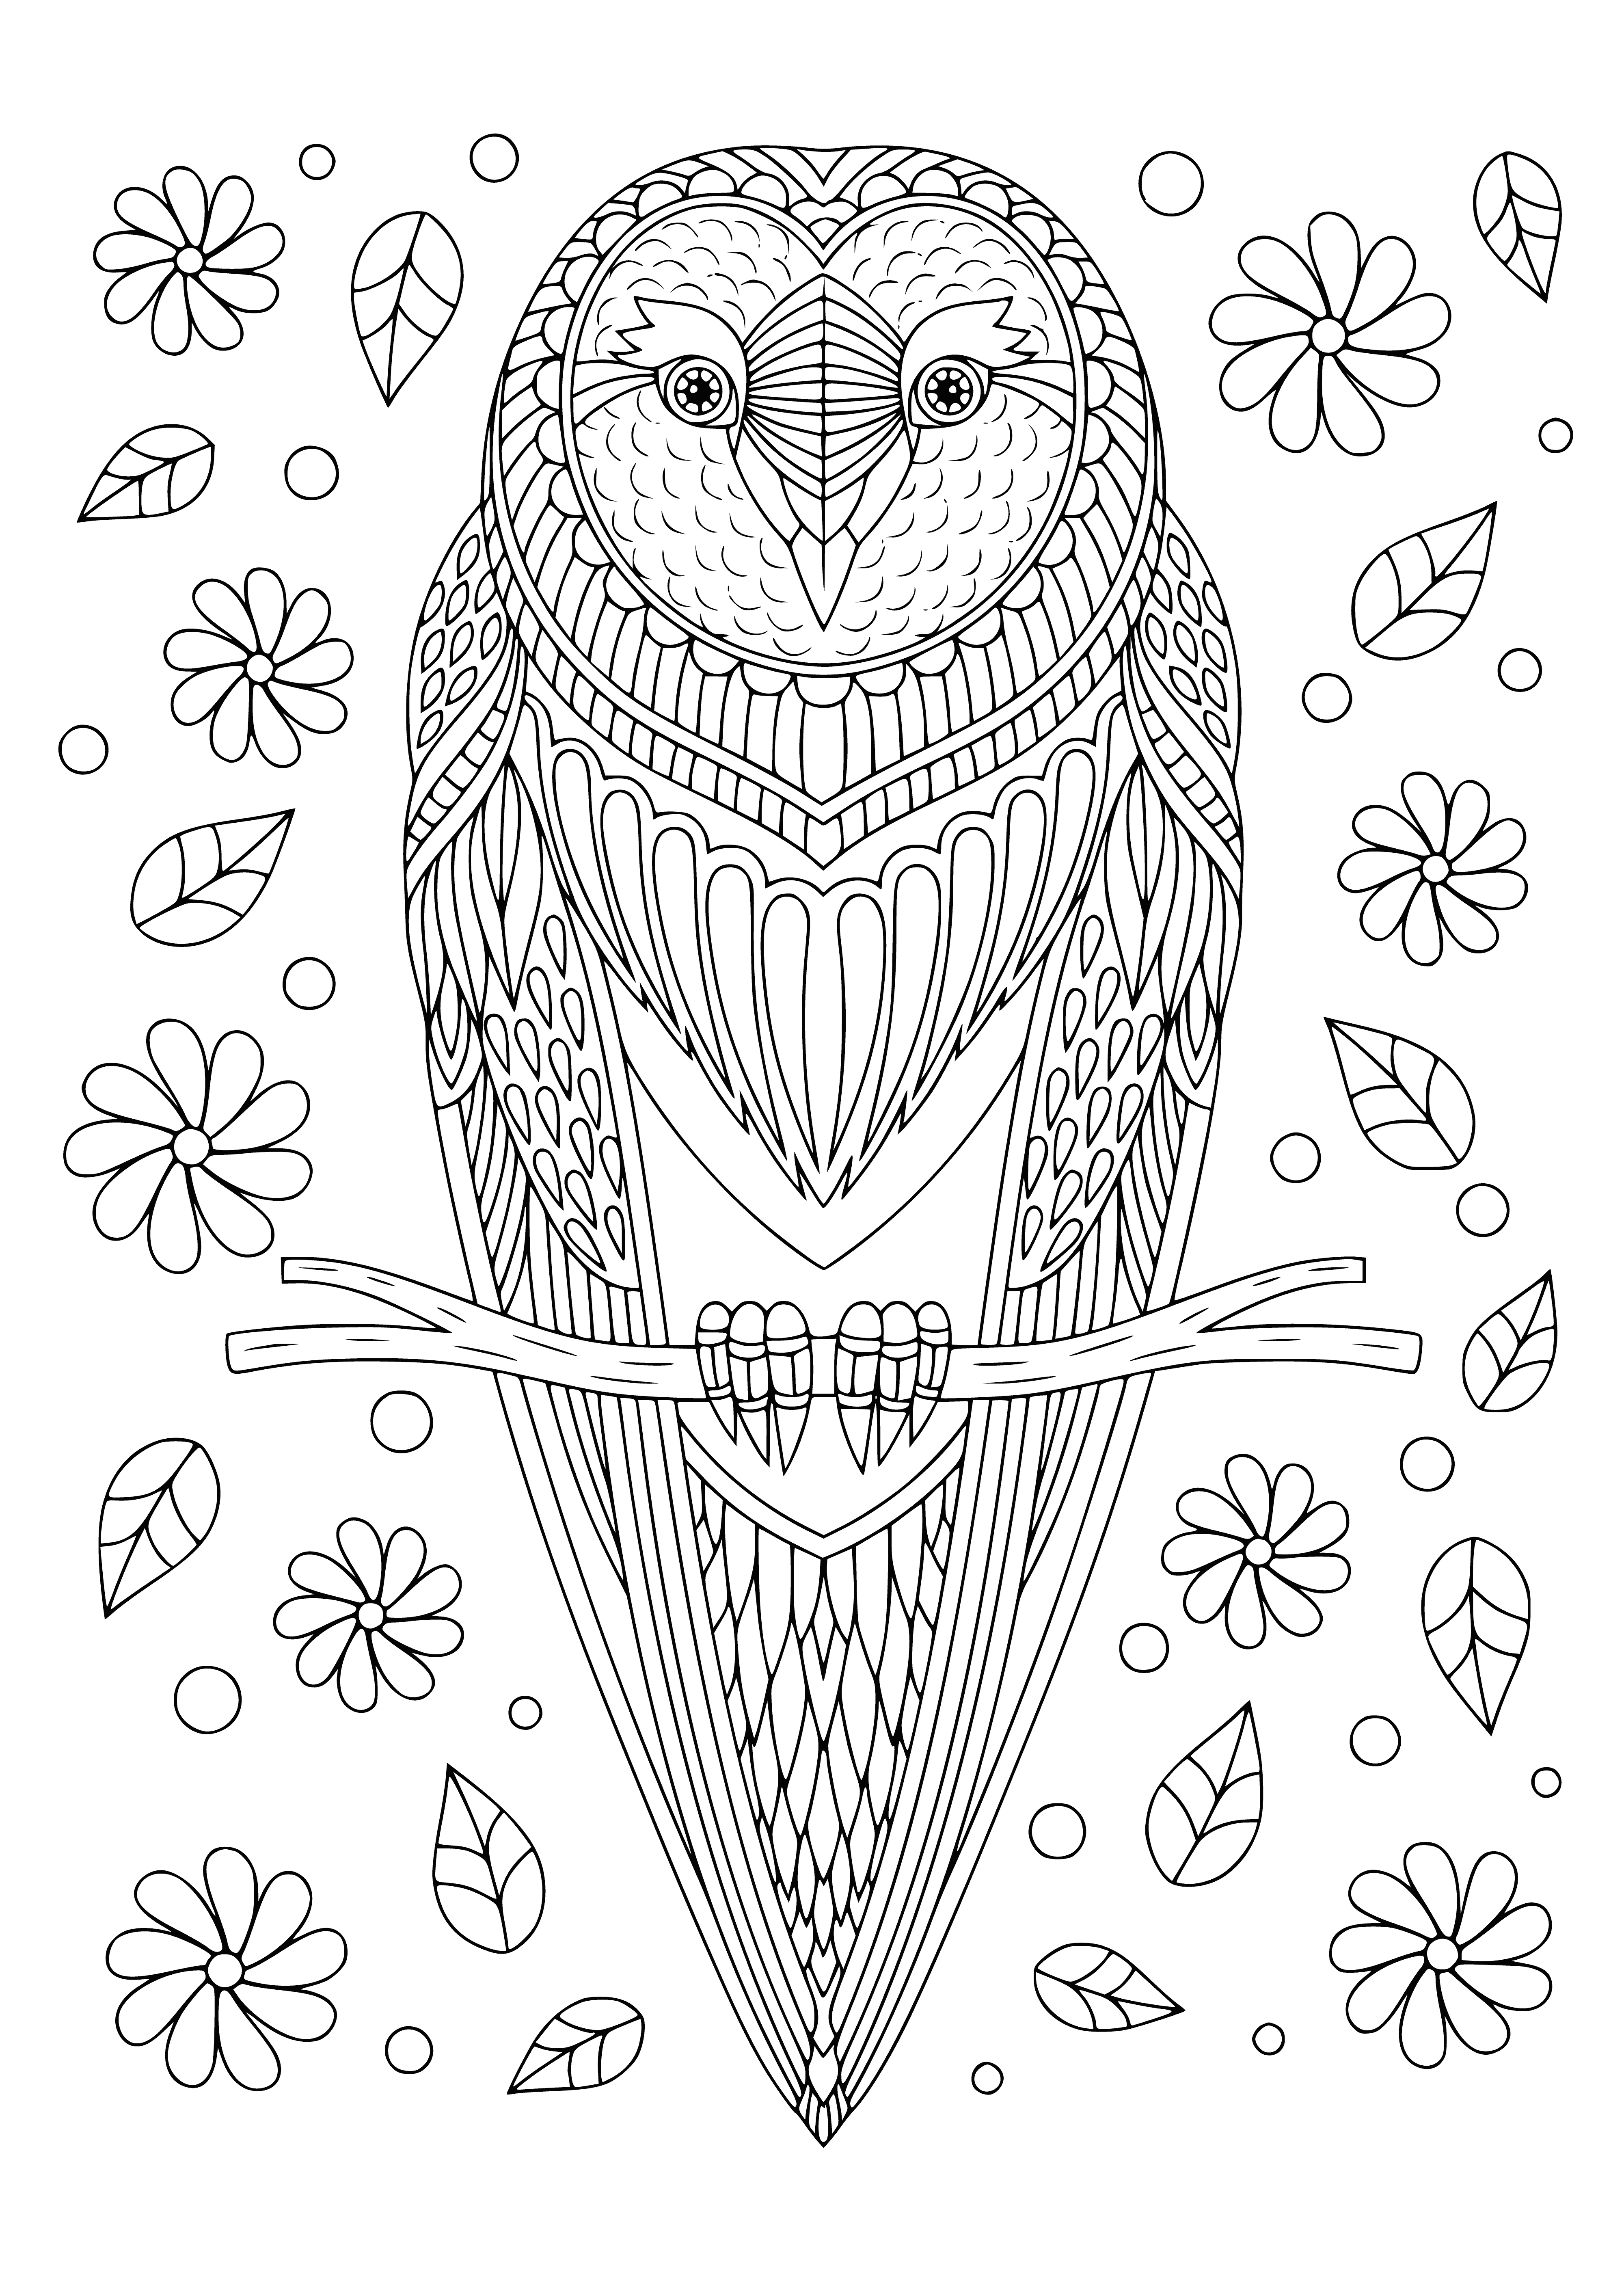 coloring page: Owl sitting on a branch with white body, gray wings & branch. Big round eyes, beak & two wings. #ColoringPage